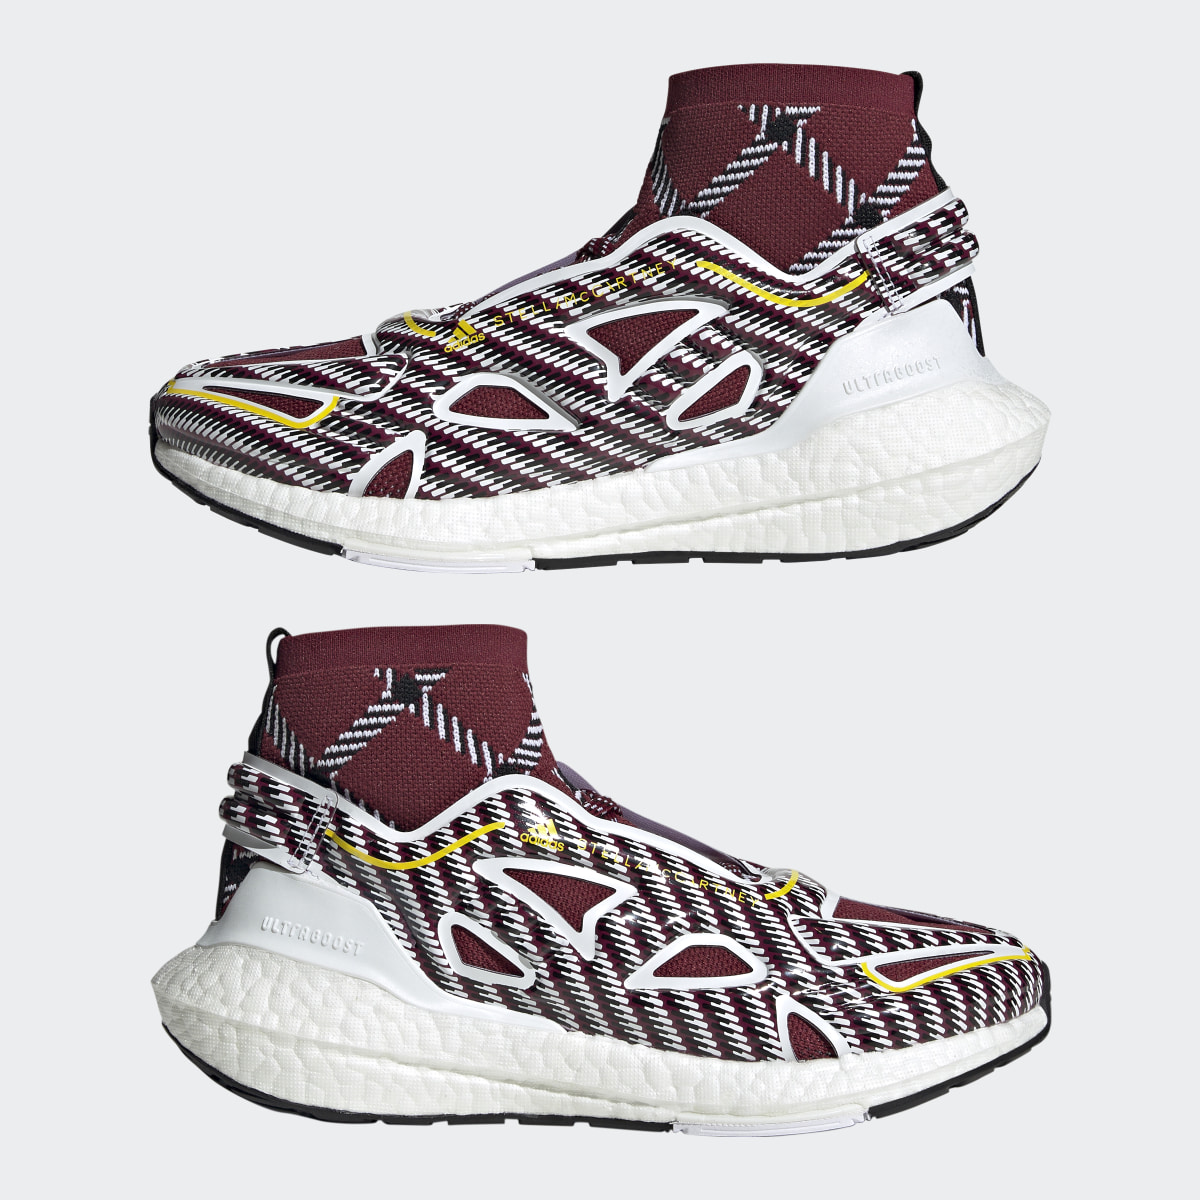 Adidas by Stella McCartney Ultraboost 22 Elevated Shoes. 8